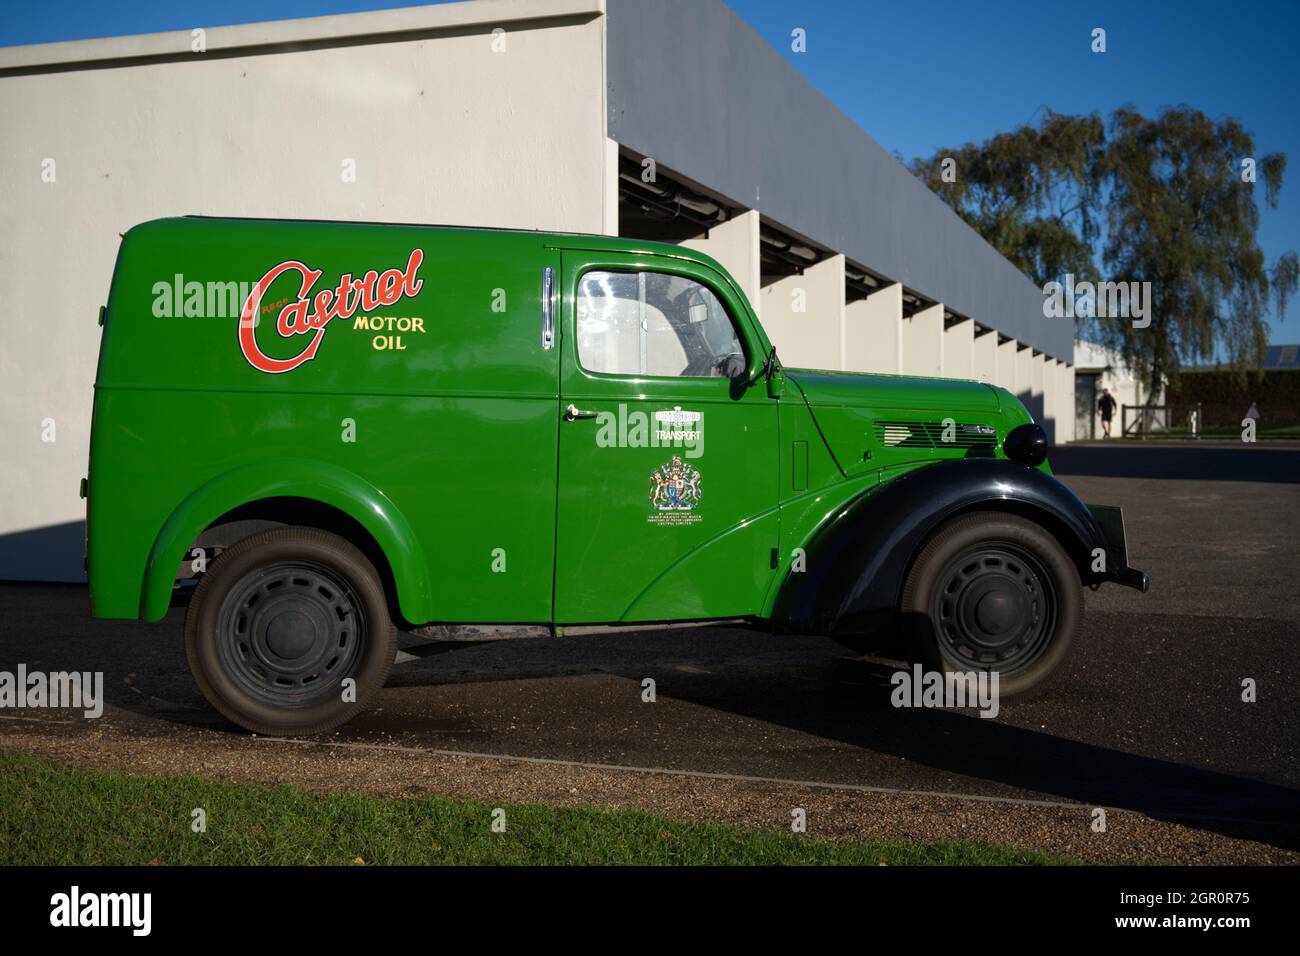 A classic Old Ford Van in the livery of Castrol Motor Oil from the 1950s parked at Goodwood. Stock Photo